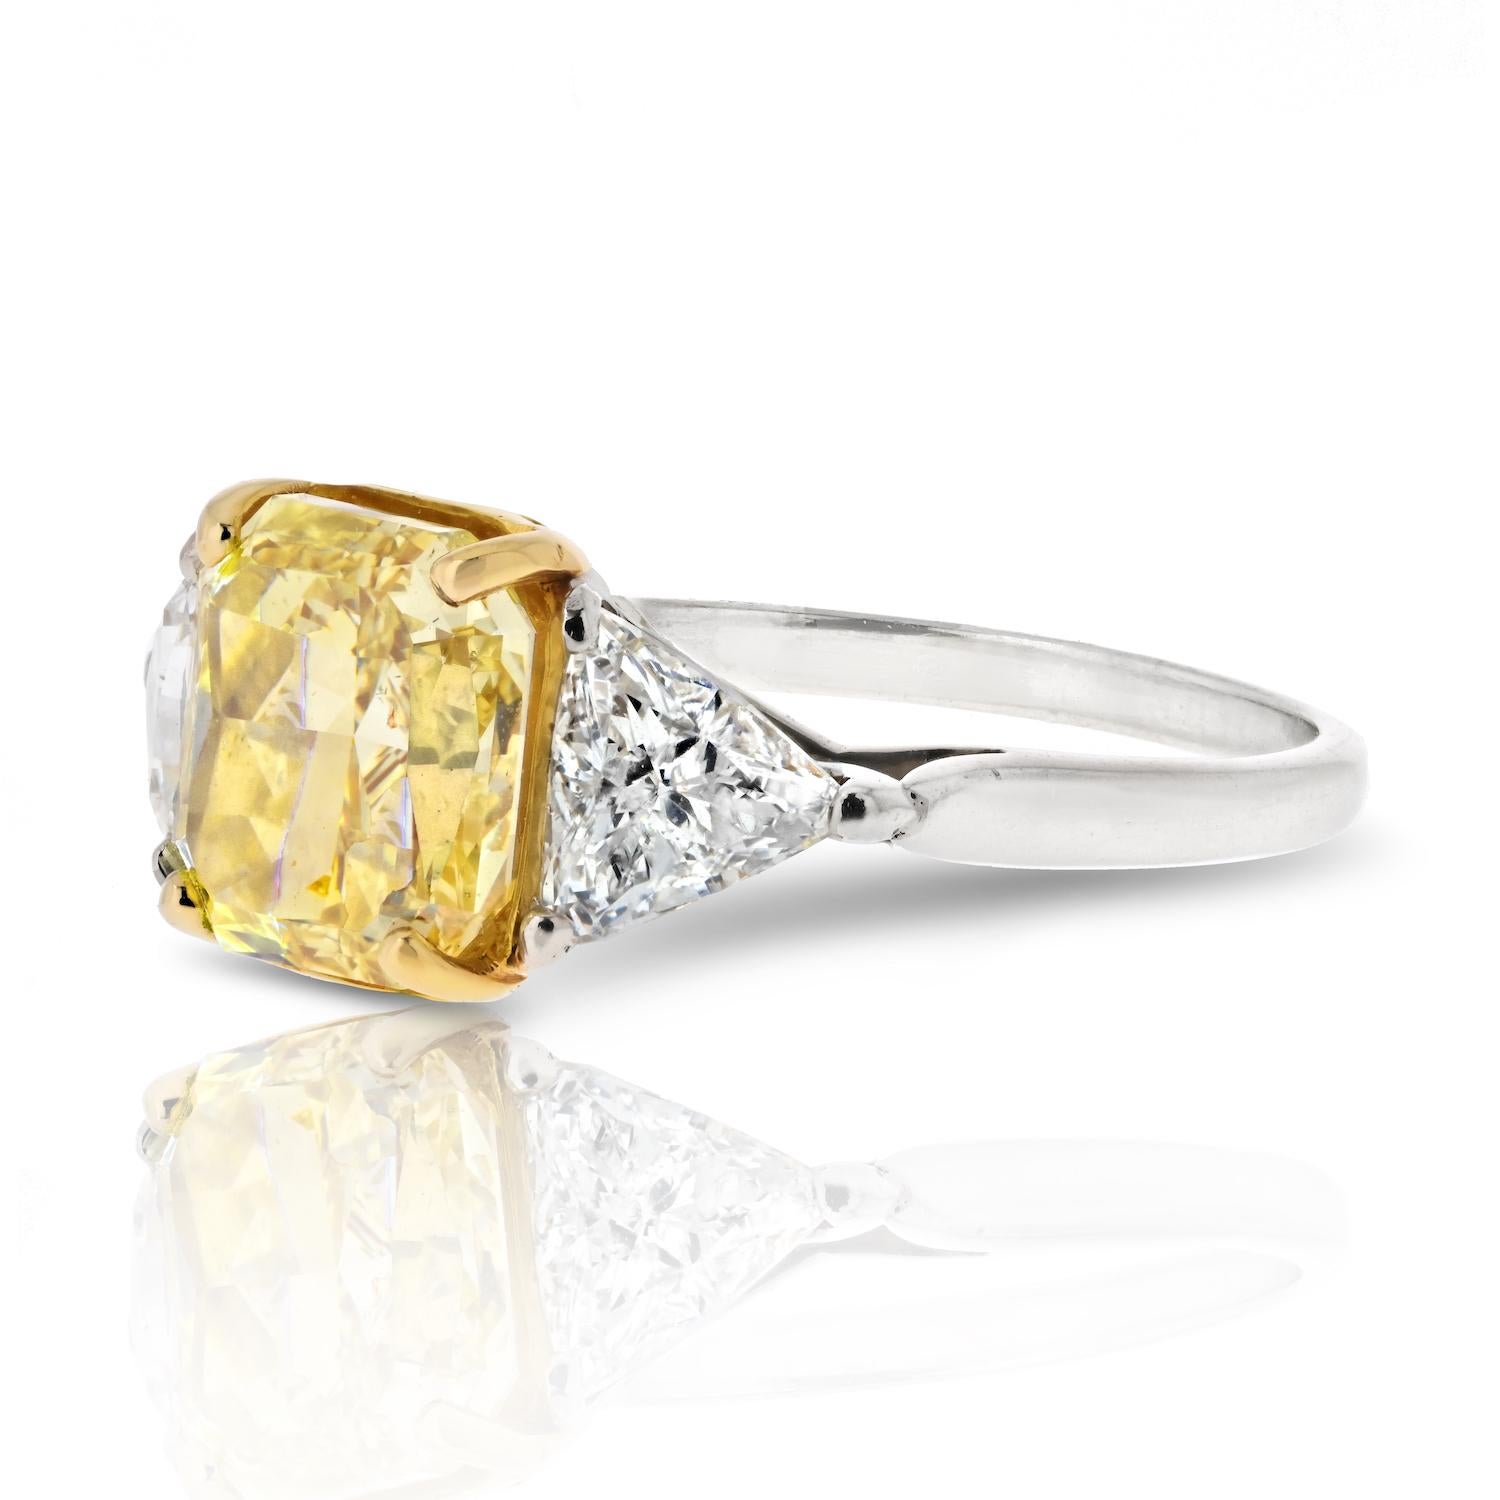 Modern 3.08ct Radiant Cut Fancy Yellow VVS2 GIA Diamond Engagement Ring For Sale